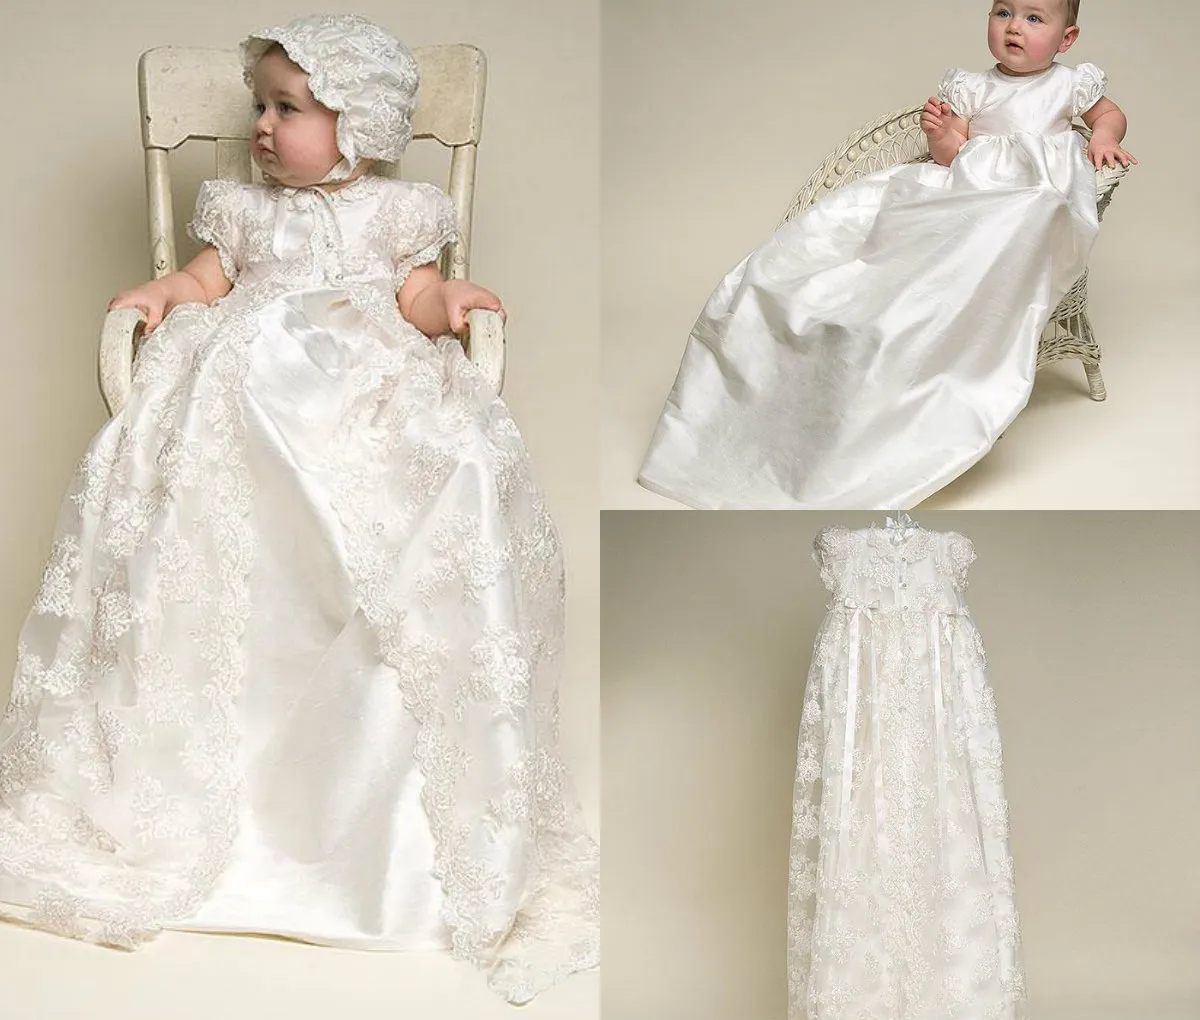 Two in One Vintage Lace Christening Gowns Short Sleeves Ivory White Champagne Long Babies Baptism First Communion Dresses